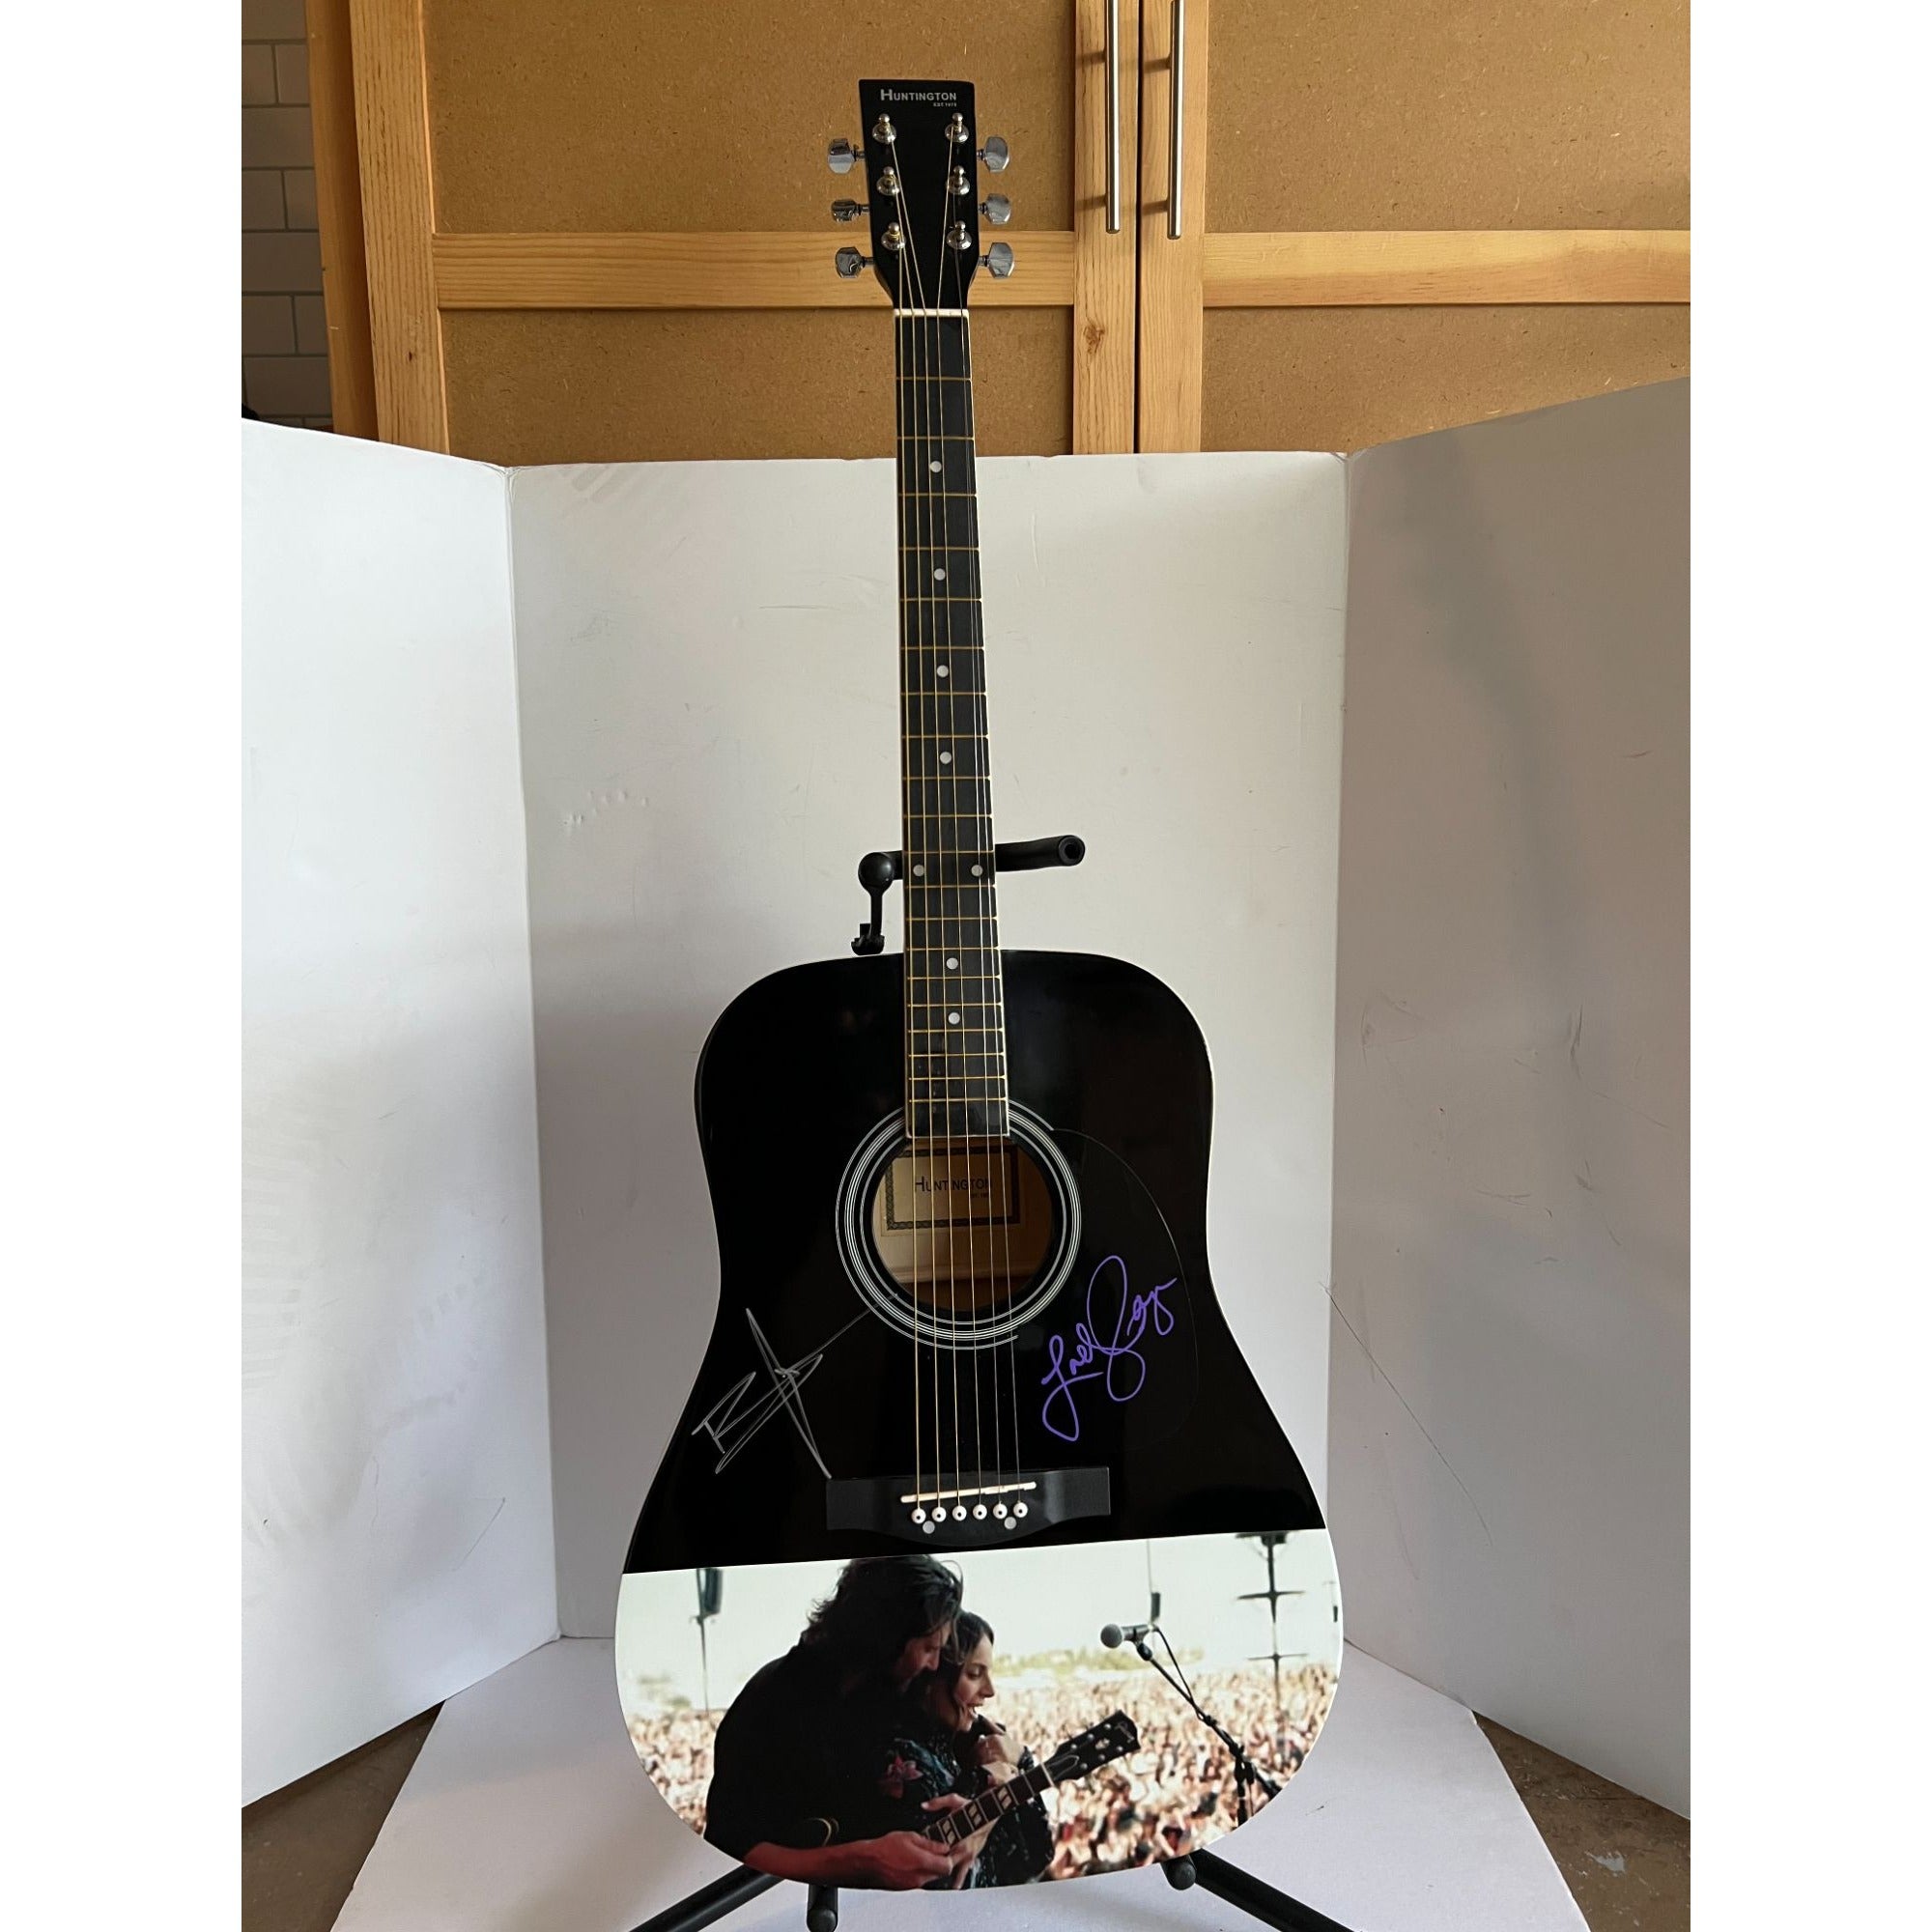 Bradley Cooper Lady Gaga "A Star Is Born" 39" one of a kind acoustic guitar signed with proof